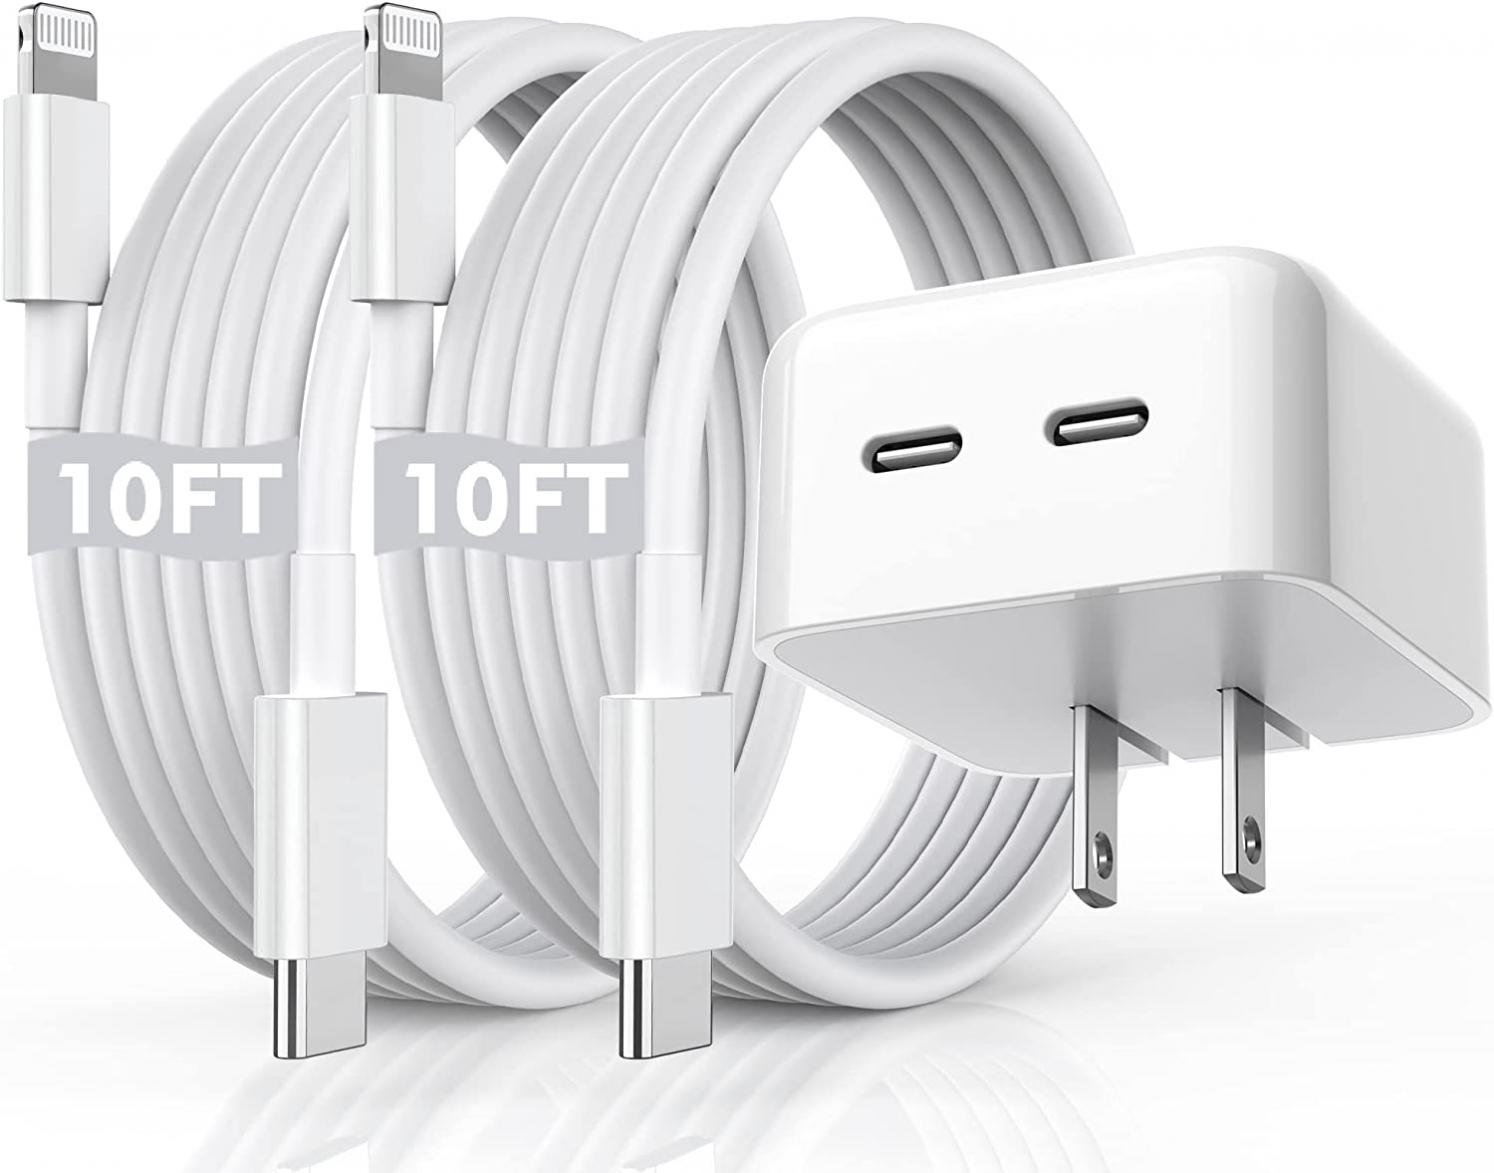 iPhone Fast Charger, 40W Dual USB-C Quick Wall Charger[MFi Certified] 2pack 10FT Extra Long Lightning Cable+Double Port Foldable USBC Apple Charger Fast Charging for iPhone 14/13/12/11/XR/XS/SE/iPad